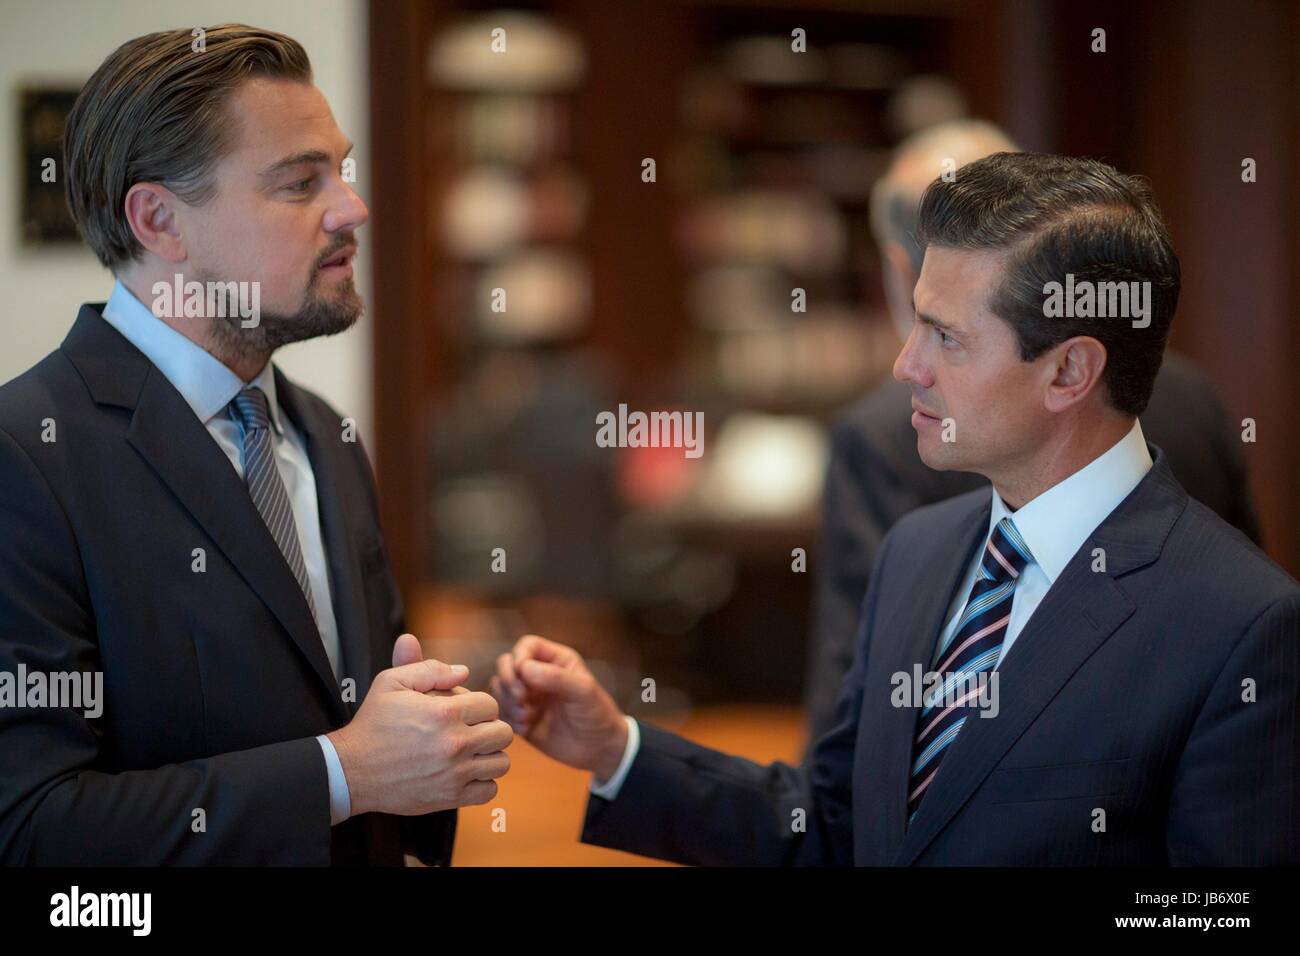 Mexico City, Mexico. 09th June, 2017. Mexican President Enrique Pena Nieto, right, and actor Leonardo DiCaprio discuss the critically endangered Vaquita, a porpoise native to Mexico's Gulf of California, at the presidential palace Los Pinos June 8, 2017 in Mexico City, Mexico. DiCaprio is joining forces with Pena Nieto and Mexican billionaire Carlos Slim to try and save the Vaquita from extinction. (photo by Presidenciamx via Planetpix) Stock Photo